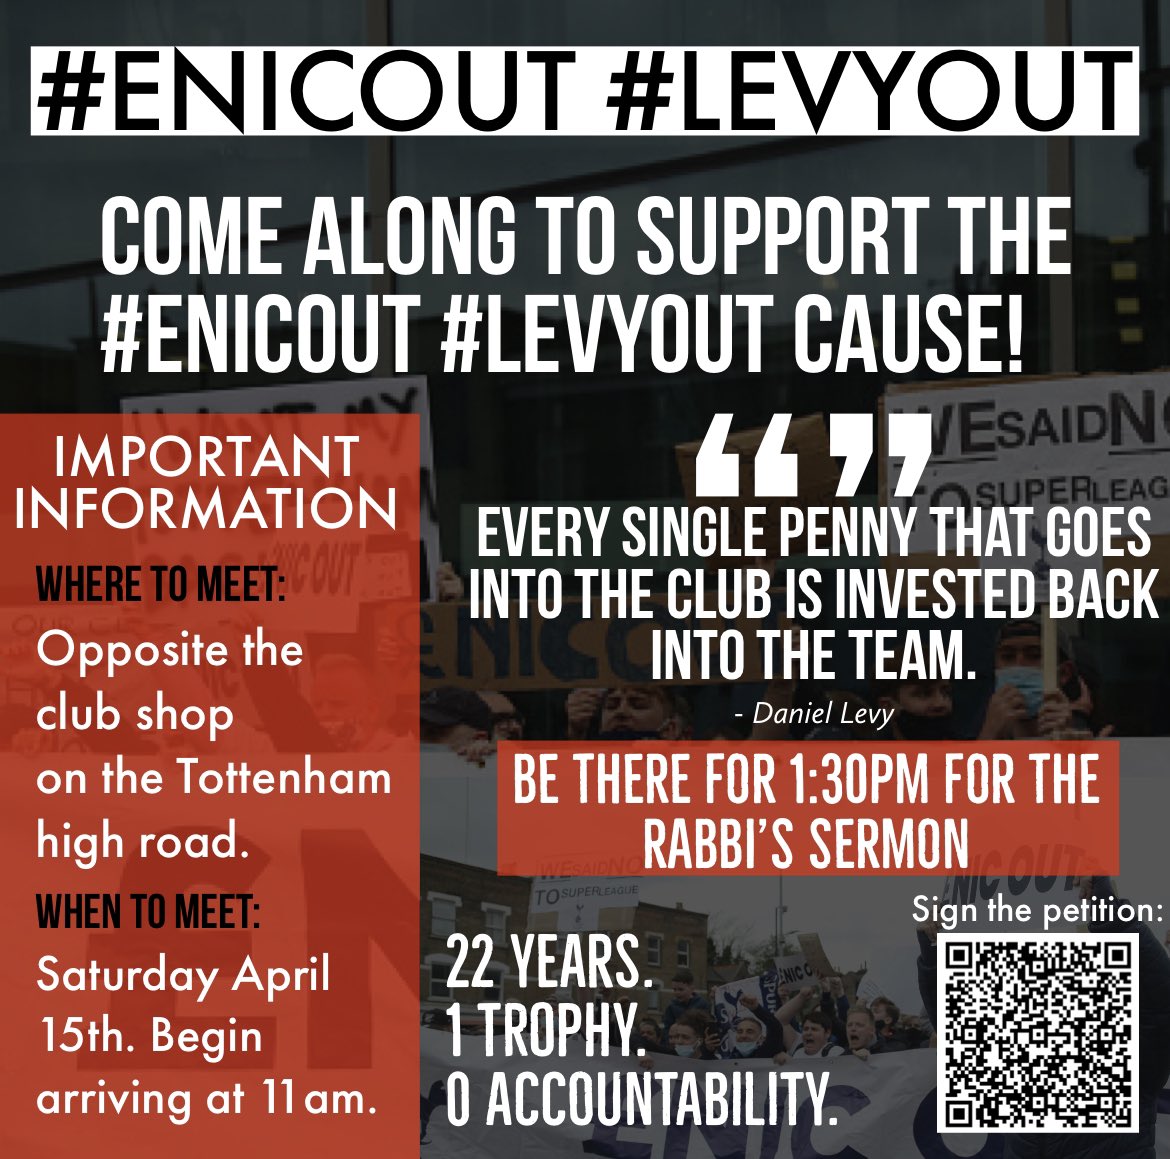 📣On my way & we go again📣 Might not get the big numbers again today but we will still be there. I'll be posting regular updates, numbers might not be great but NOT allowing people to put photos up showing false numbers at false times. RETWEET AND AS ALWAYS #LevyOut #ENICOut